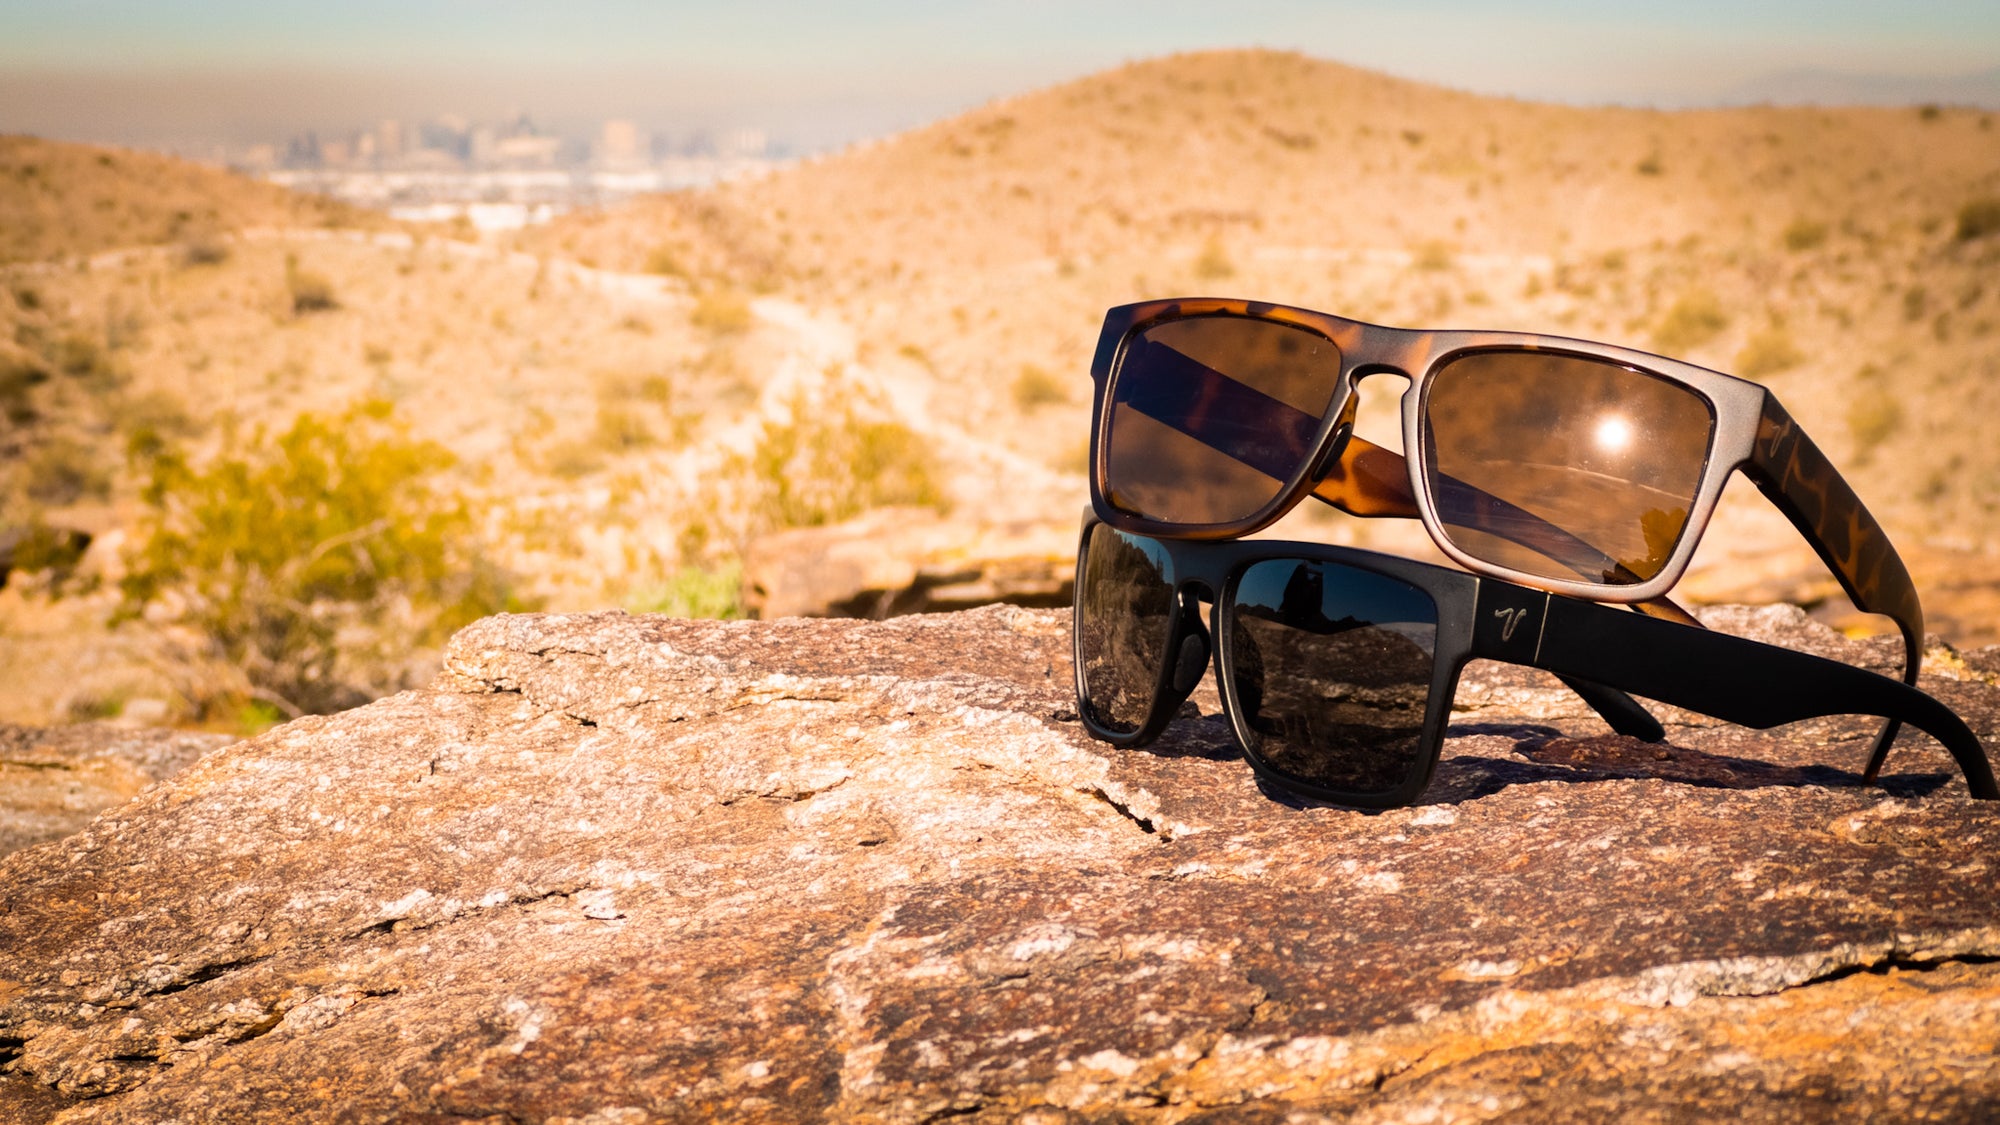 Best 32 Sunglasses of 2023: Stylish, Adventure-Ready Sunglasses For Men and Women.